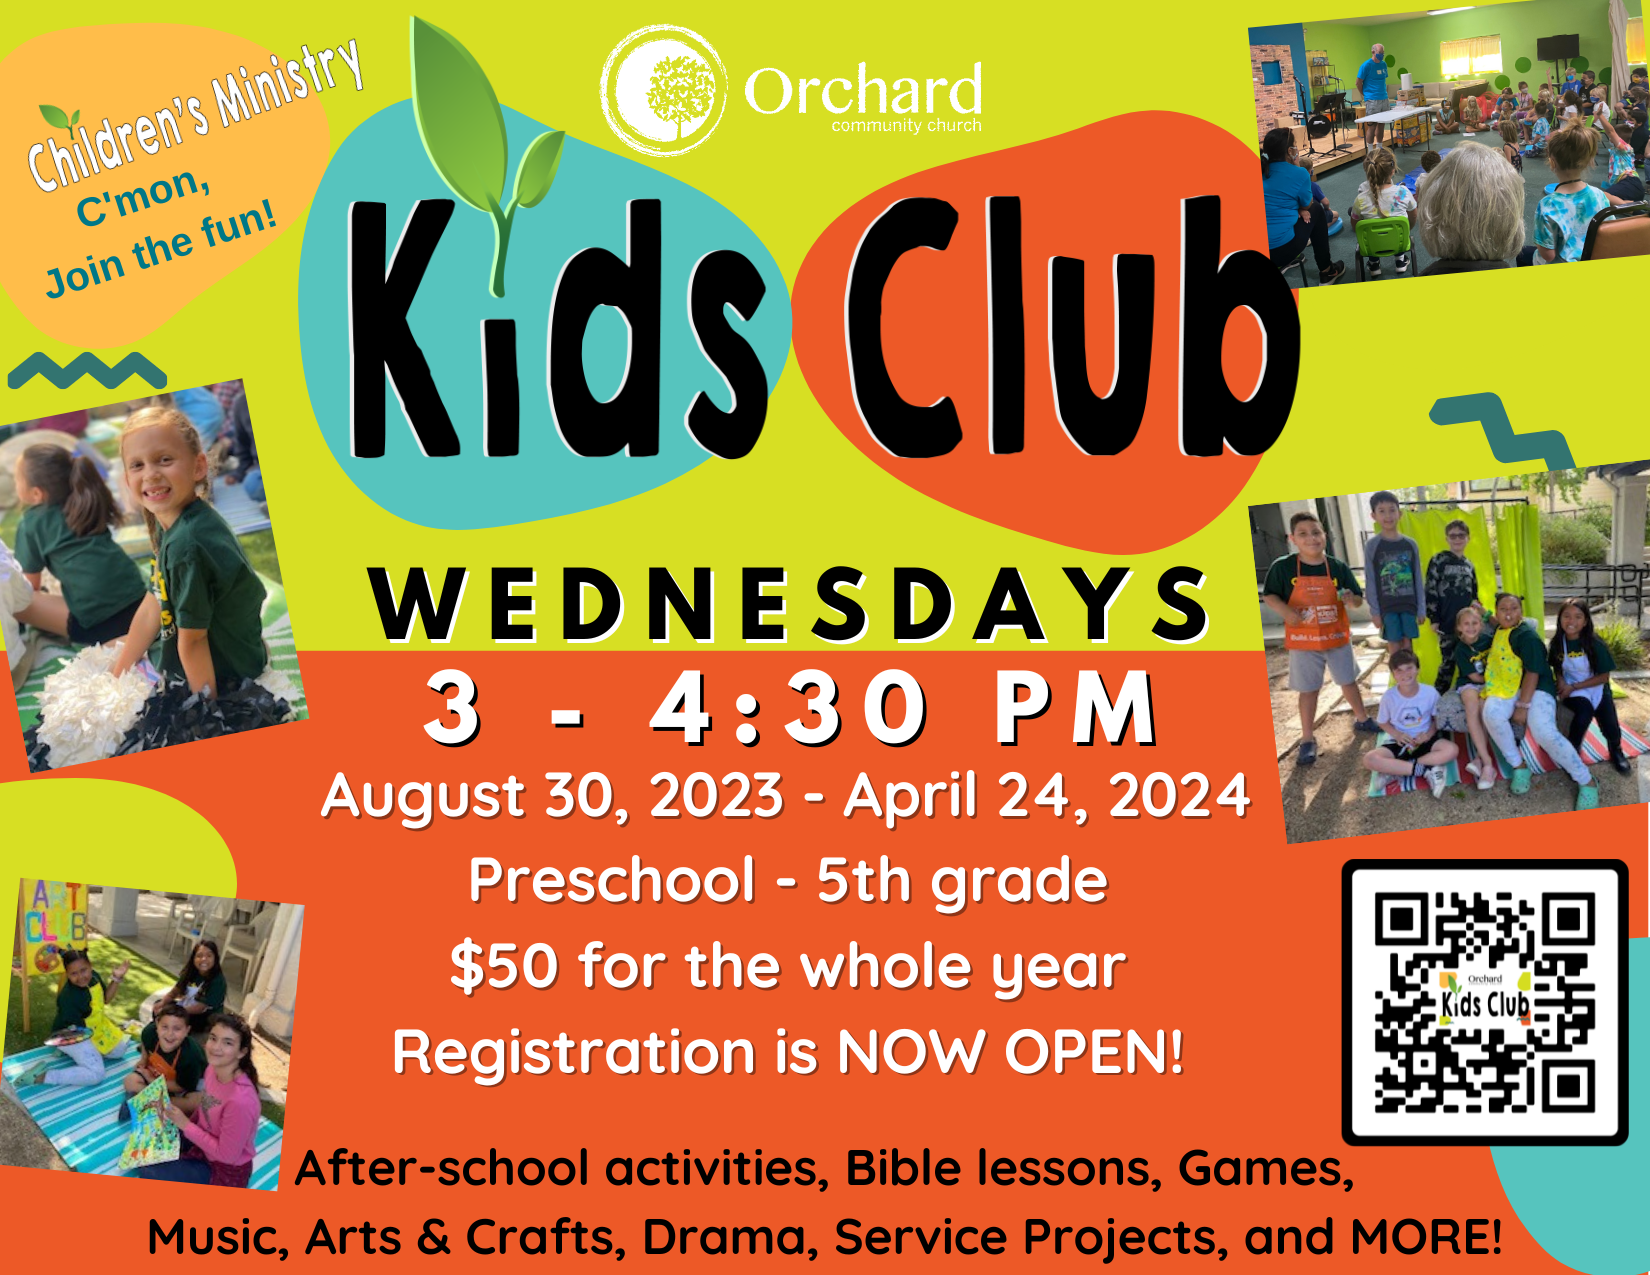 Registration is now open for Kids Club. 